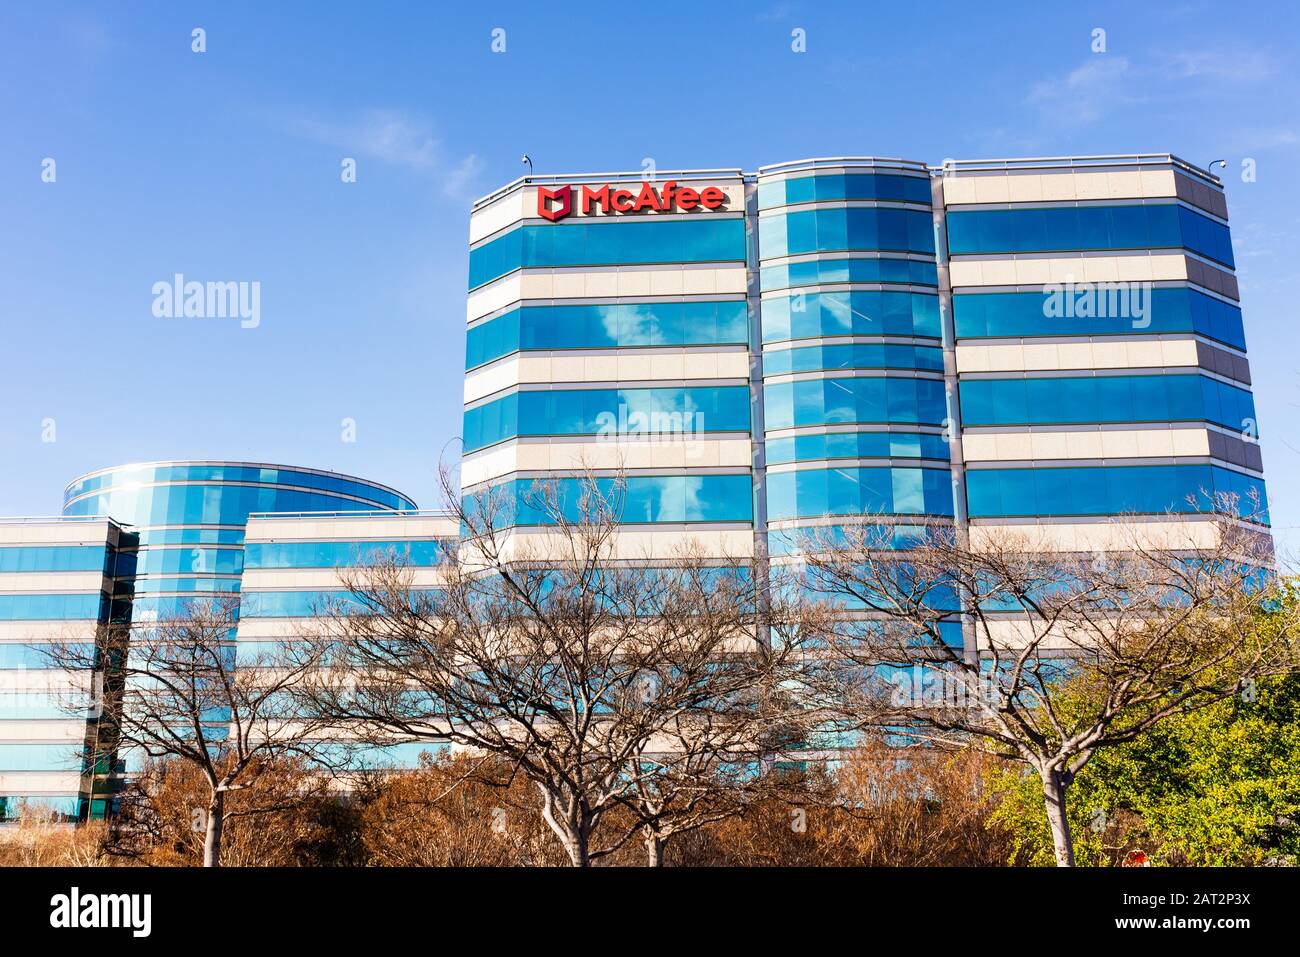 Jan 29, 2020 Santa Clara / CA / USA - McAfee Headquarters in Silicon Valley; McAfee, LLC is an American global computer security software company, joi Stock Photo